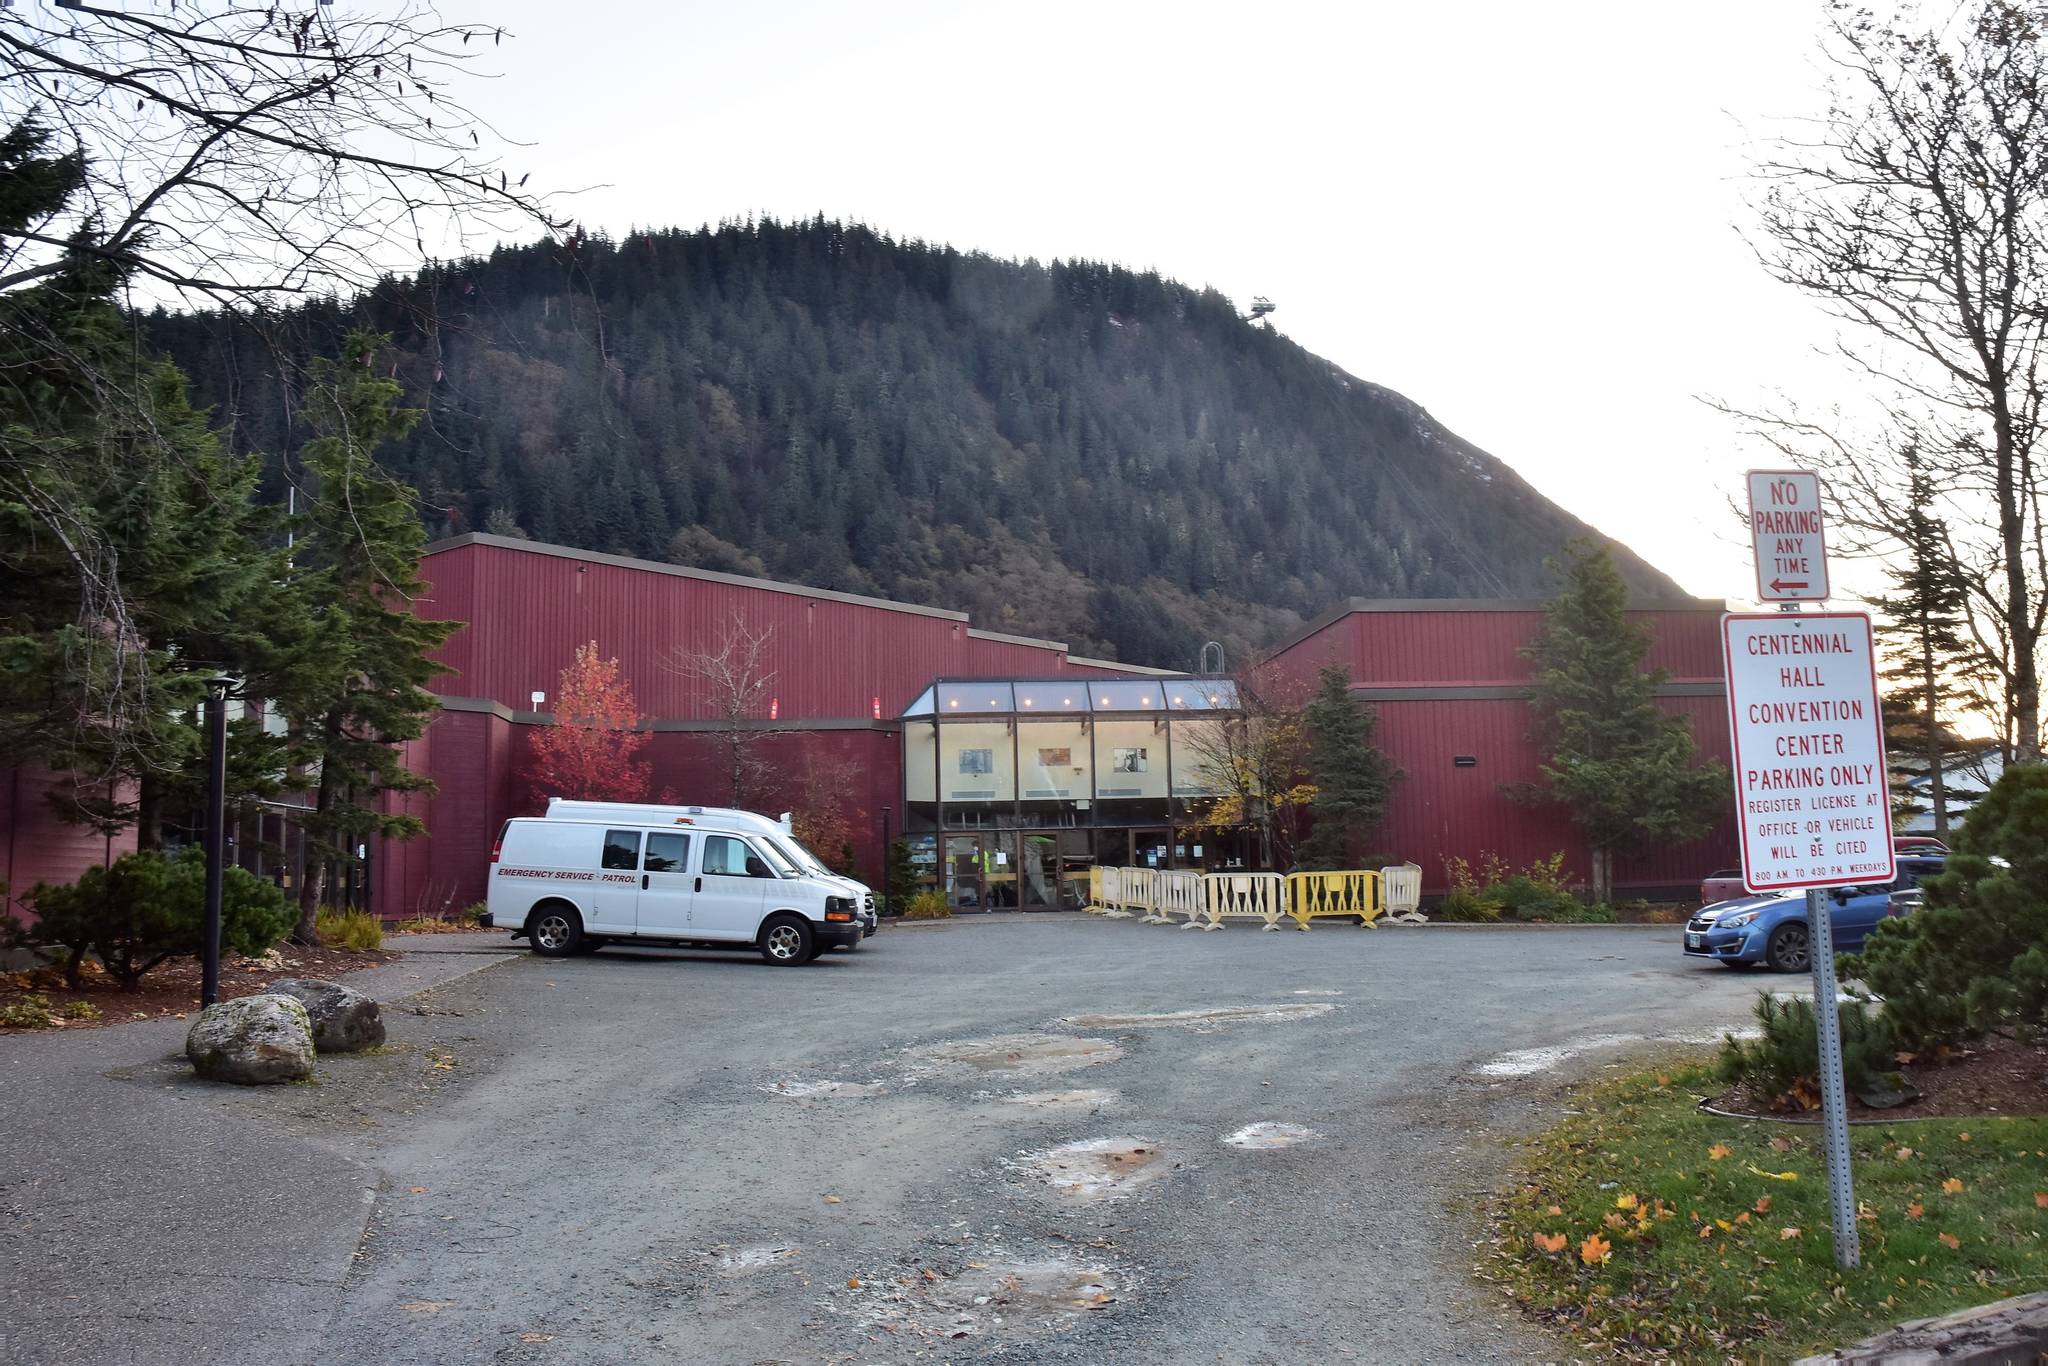 The City and Borough of Juneau converted Centennial Hall into a quarantine facility for unsheltered people who've tested positive for COVID-19 and can't isolate on their own. Wednesday, Oct. 21, 2020. (Peter Segall / Juneau Empire)